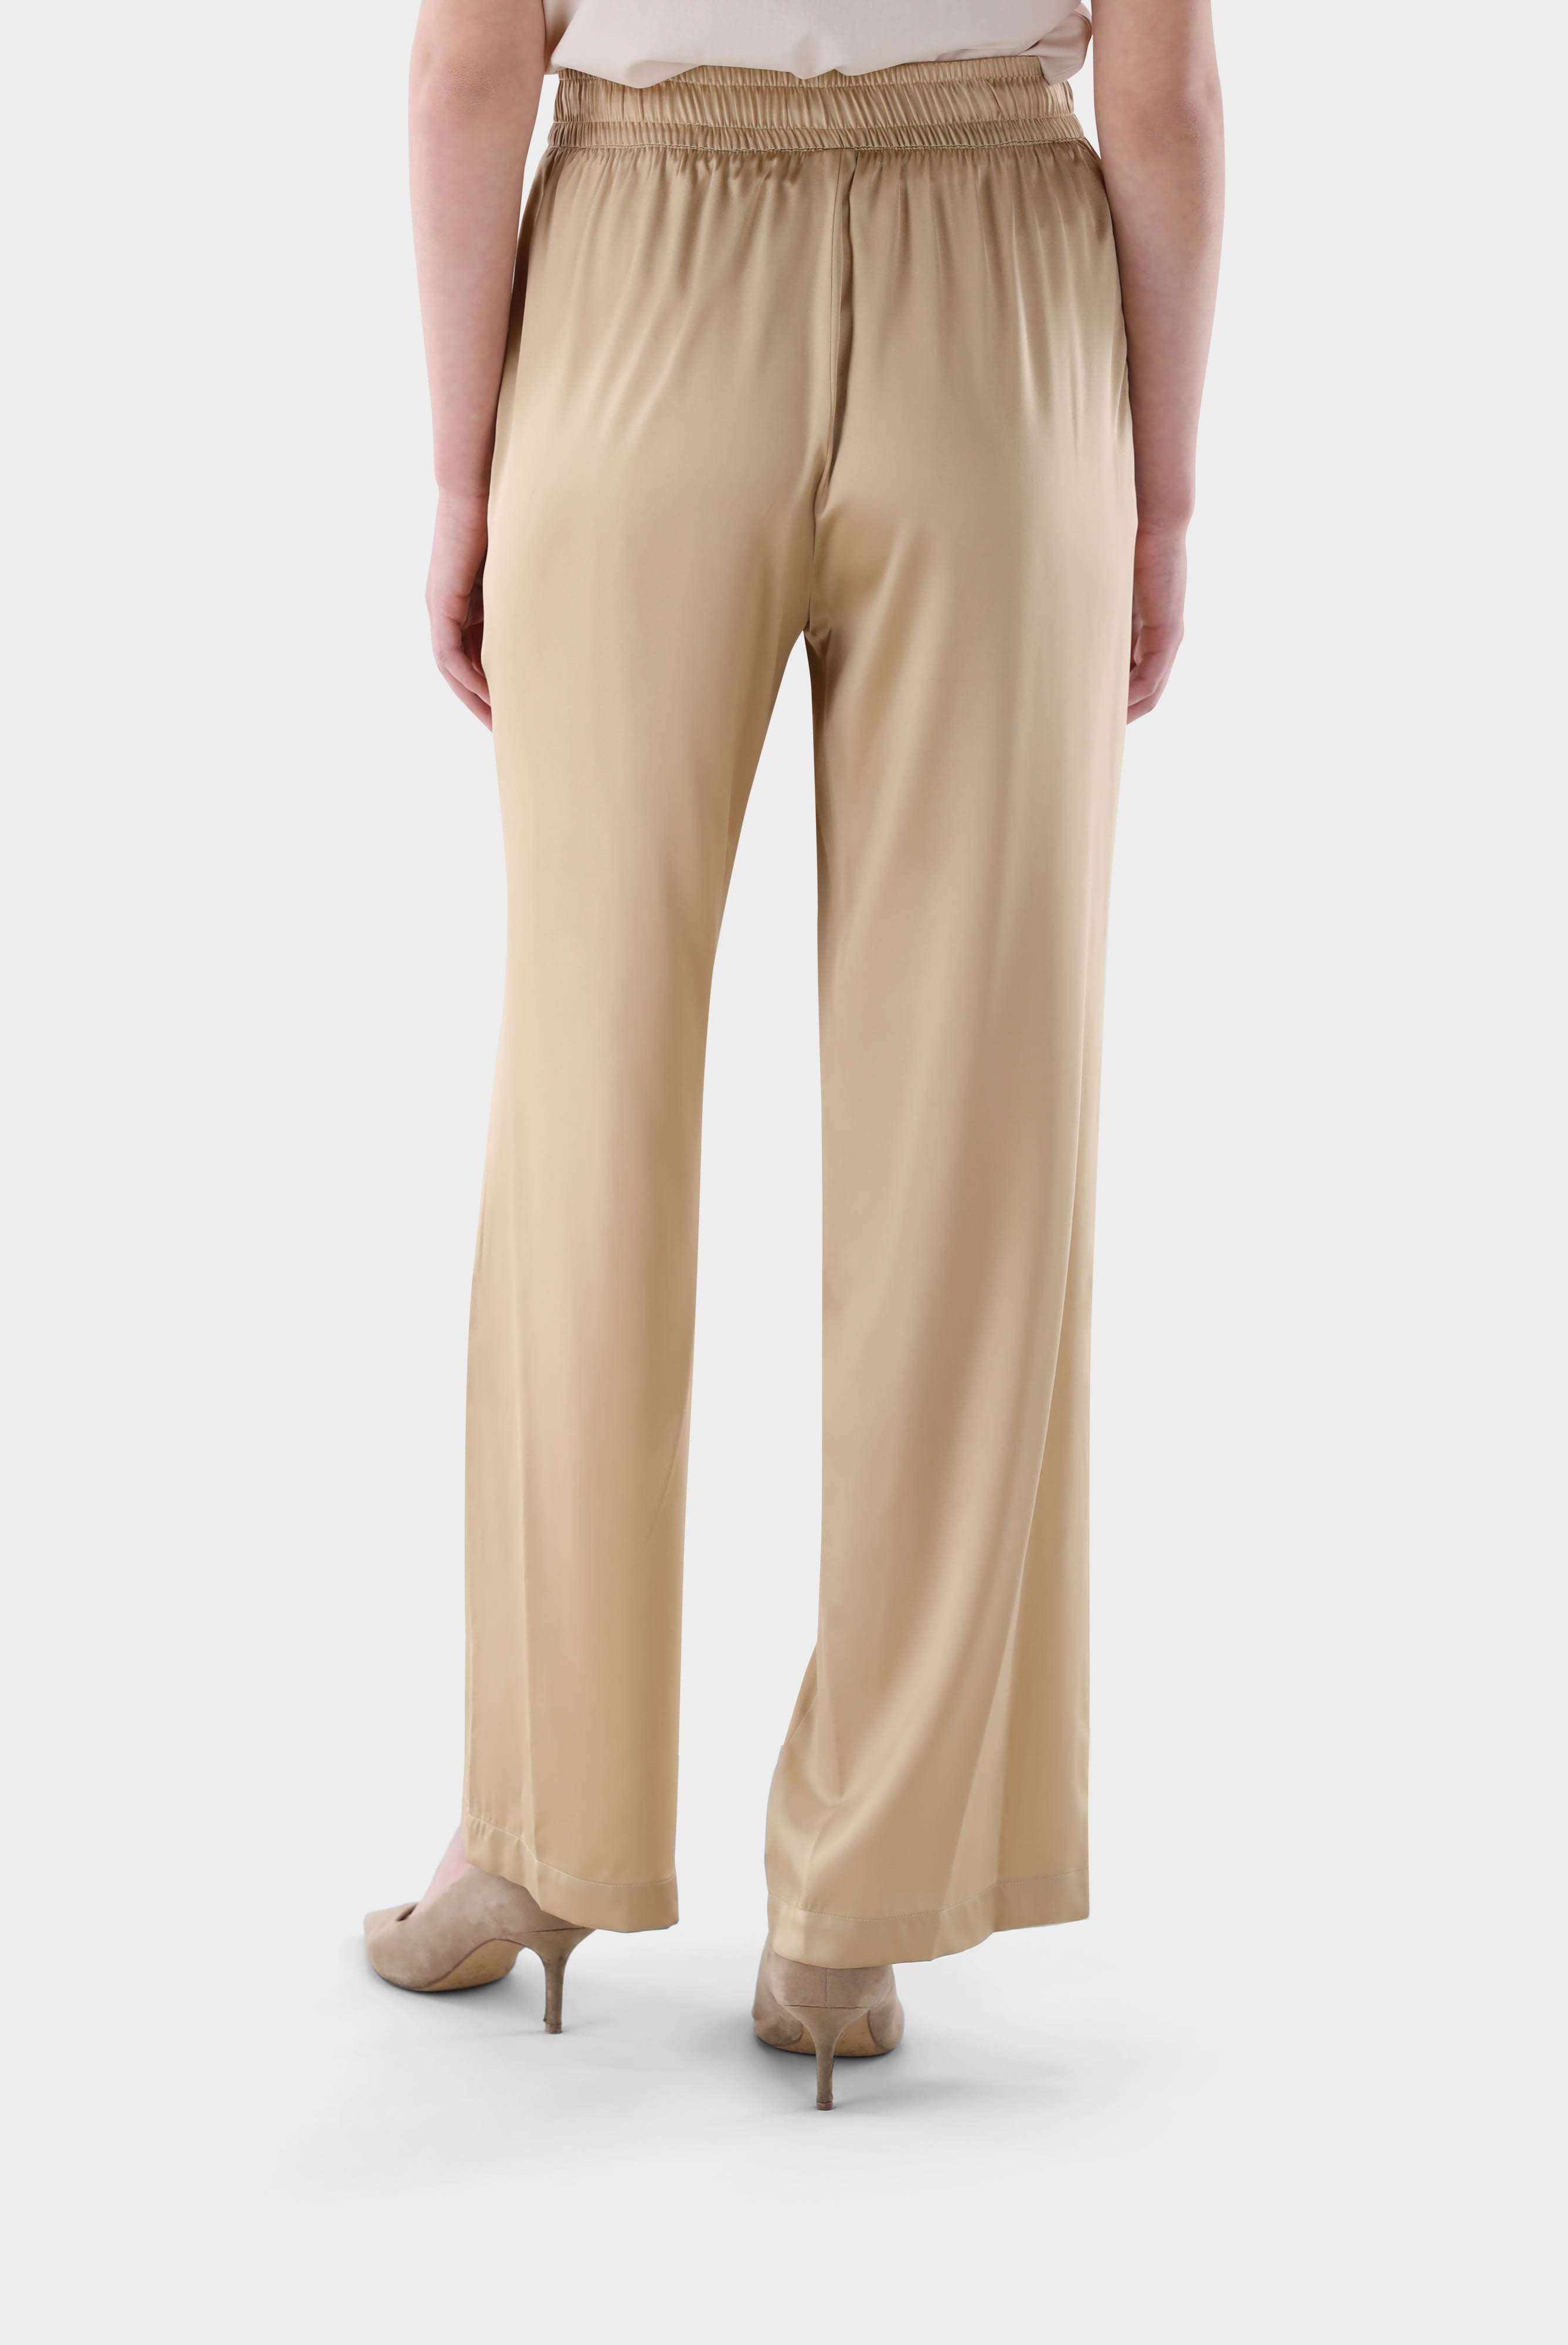 Jeans & Trousers+Palazzo trousers in silk satin stretch+05.6743..155152.250.34